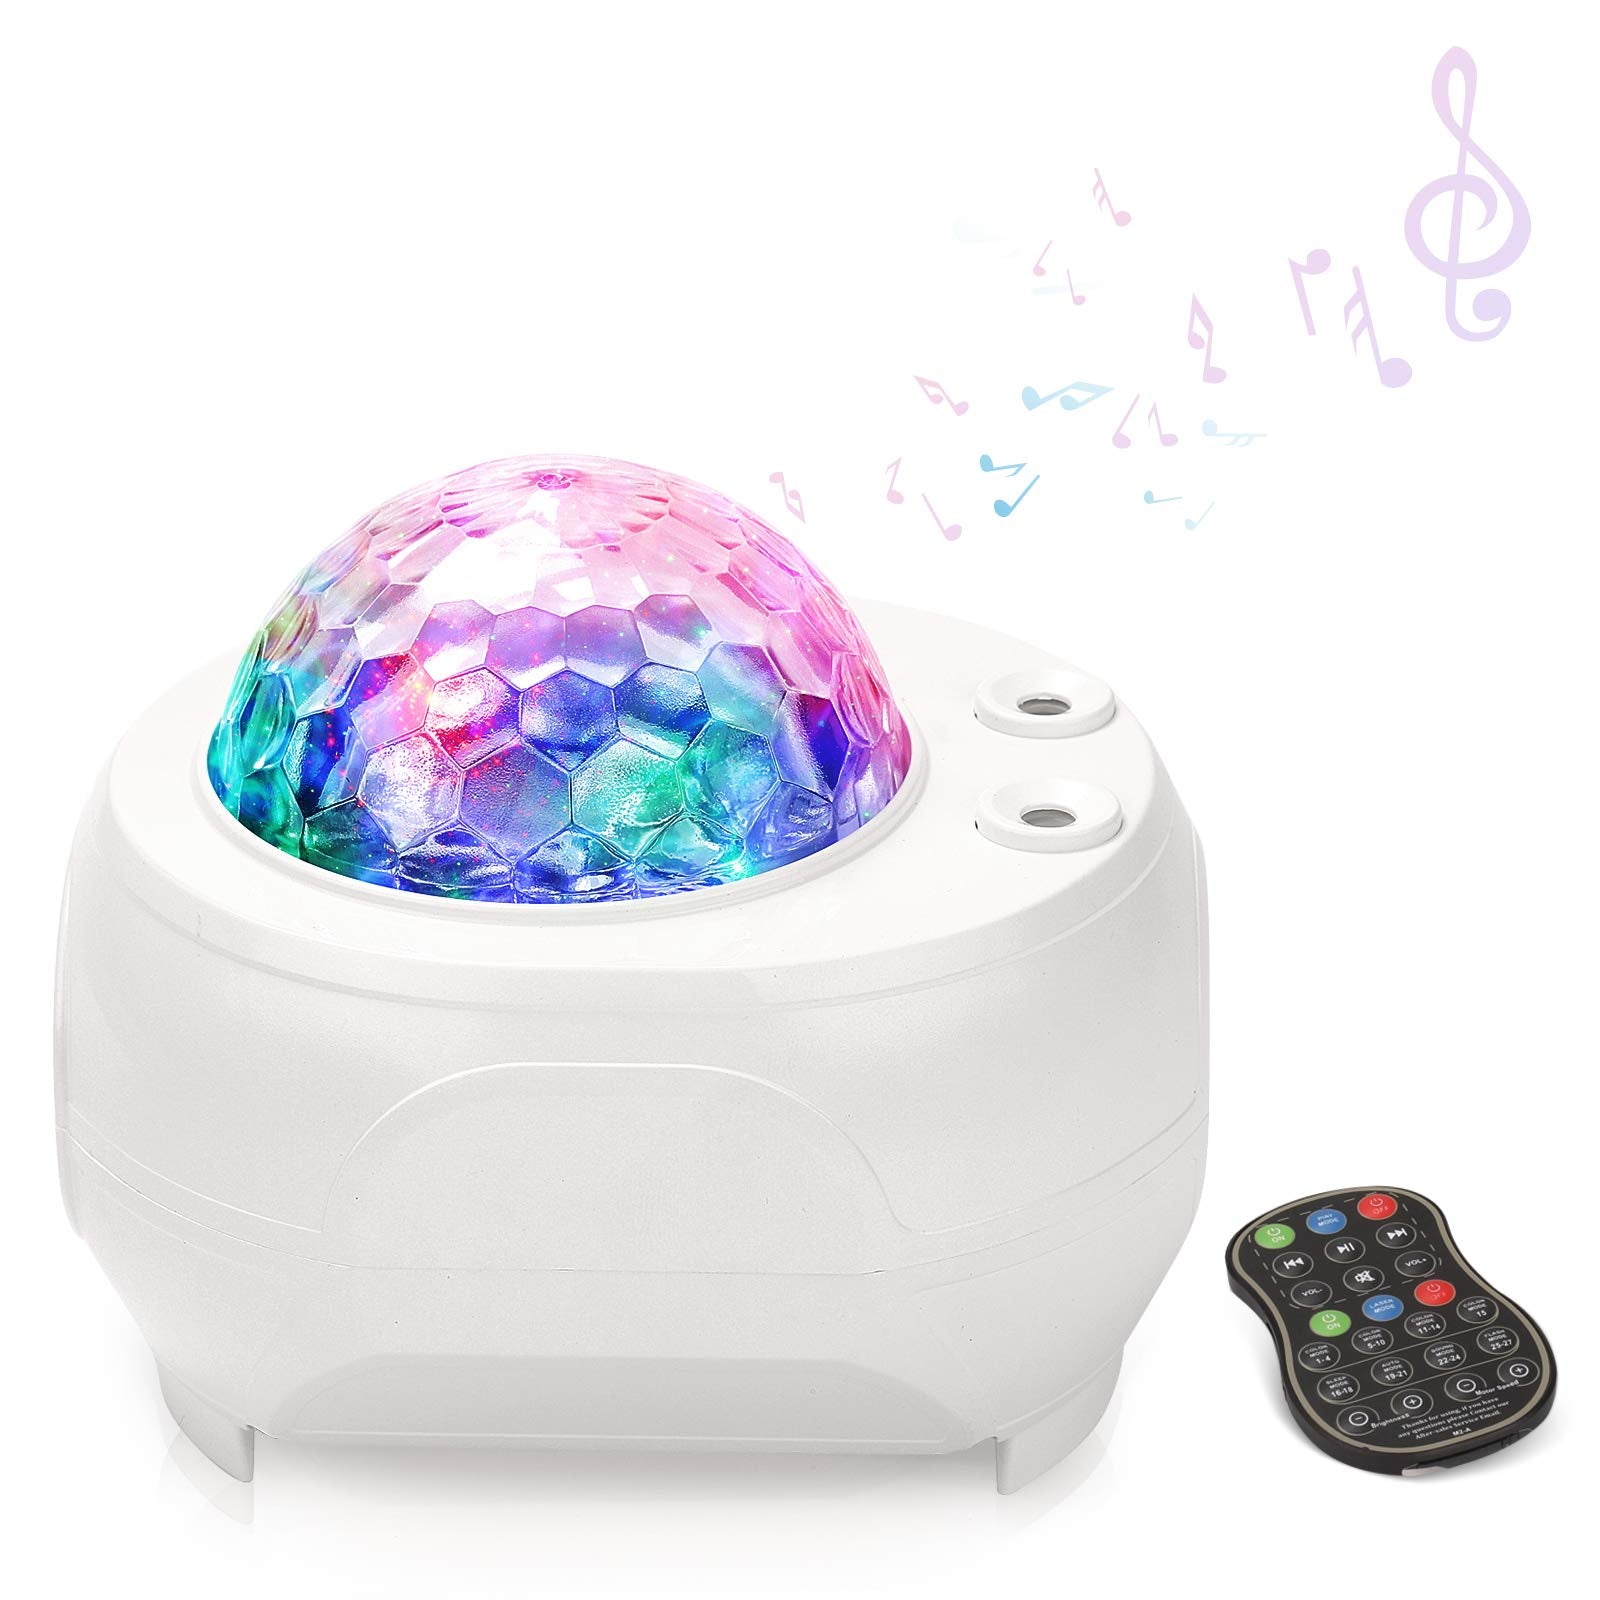 Starry Night Light for Kids, LED Star Projector with Galaxy Light Build-in Bluetooth Hi-Fi Stereo Music Speaker for Kid's BedroomGifts//BirthdayParty/ Home Theatre